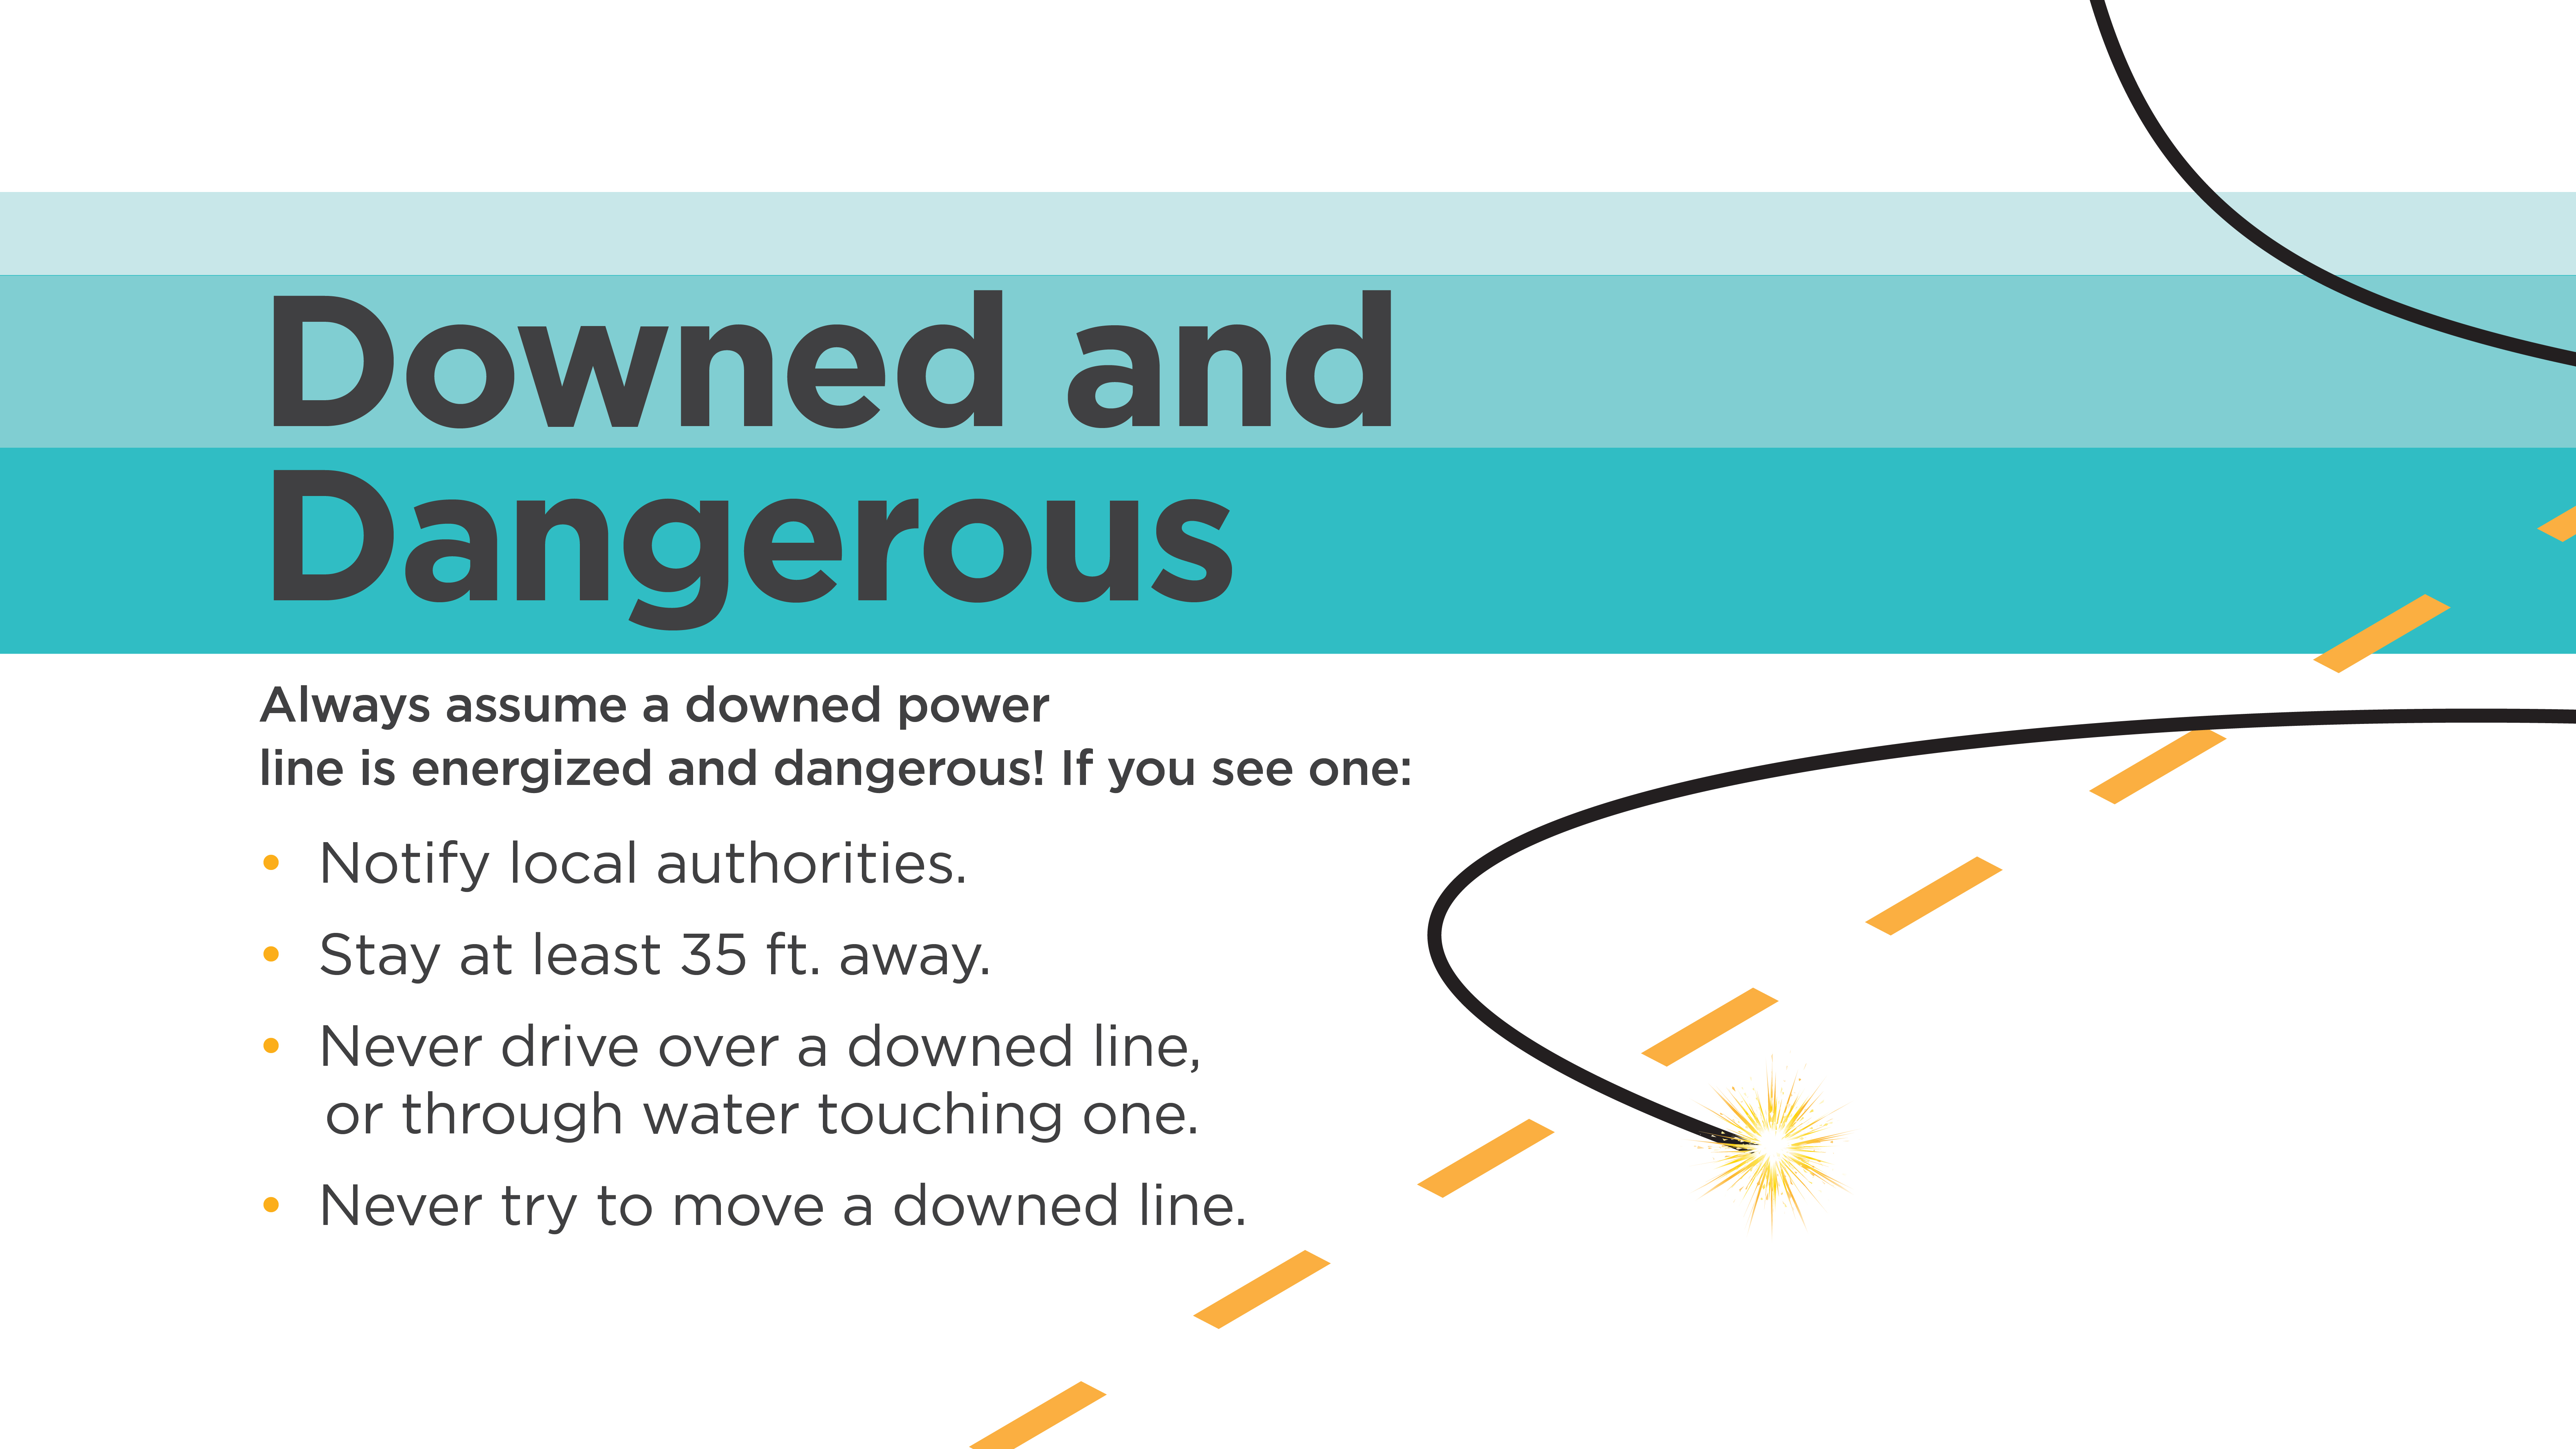 DOWNED AND DANGEROUS | Always assume a downed power line is energized and dangerous! If you see one: -Notify local authorities. -Stay at least 35 ft. away. -Never drive over a downed line, or through water touching one. -Never try to move a downed line.